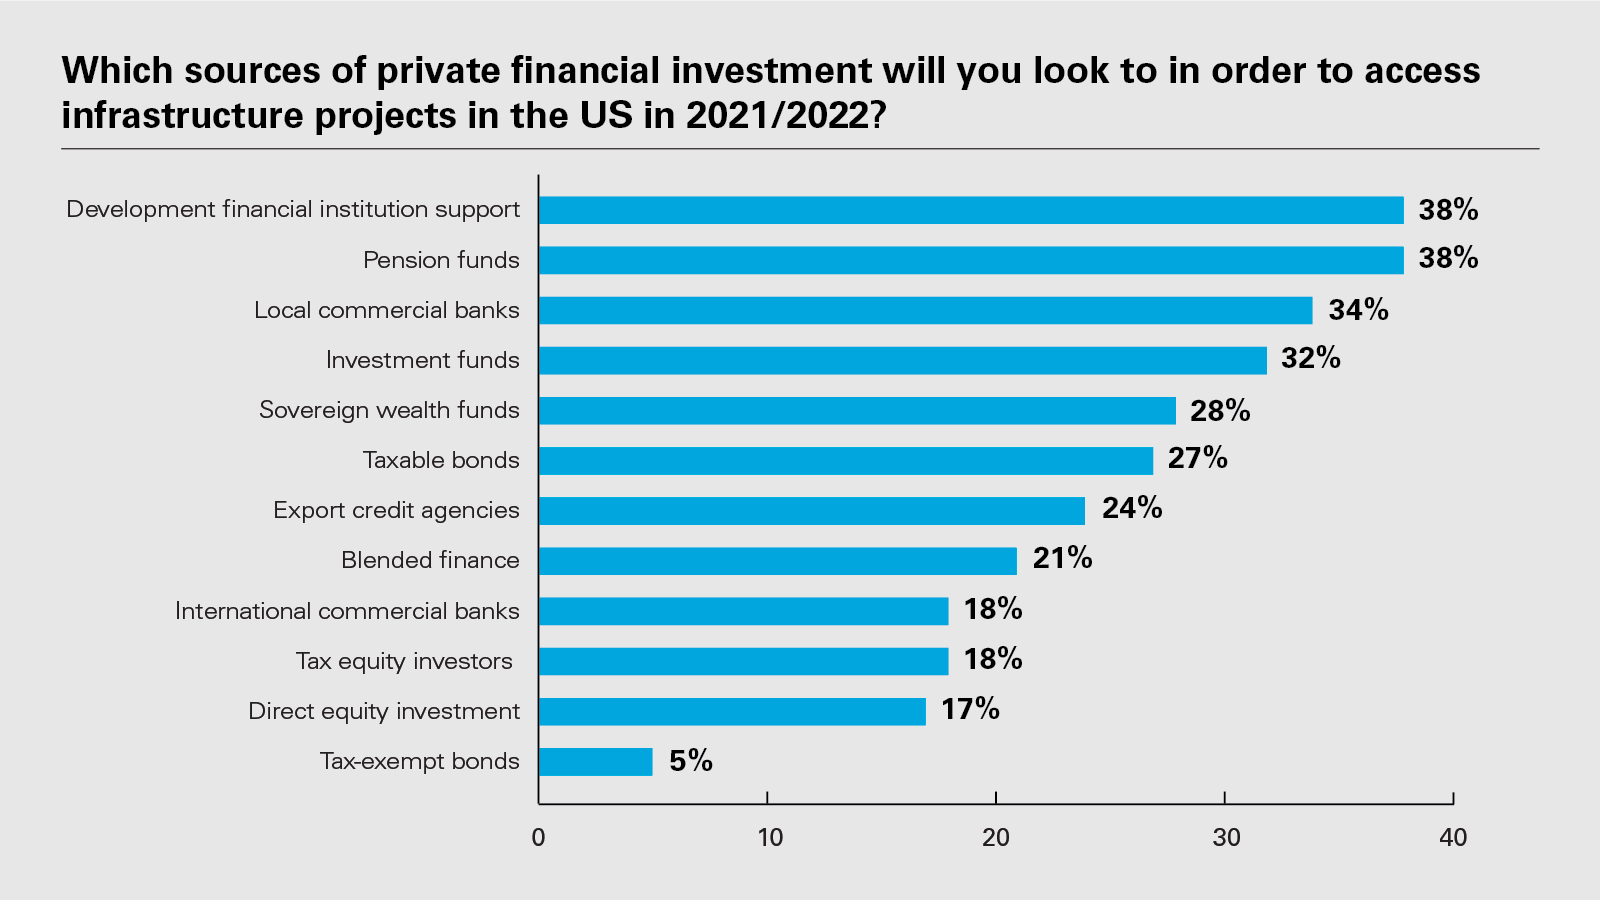 Which sources of private financial investment will you look to in order to access infrastructure projects in the US in 2021/2022?